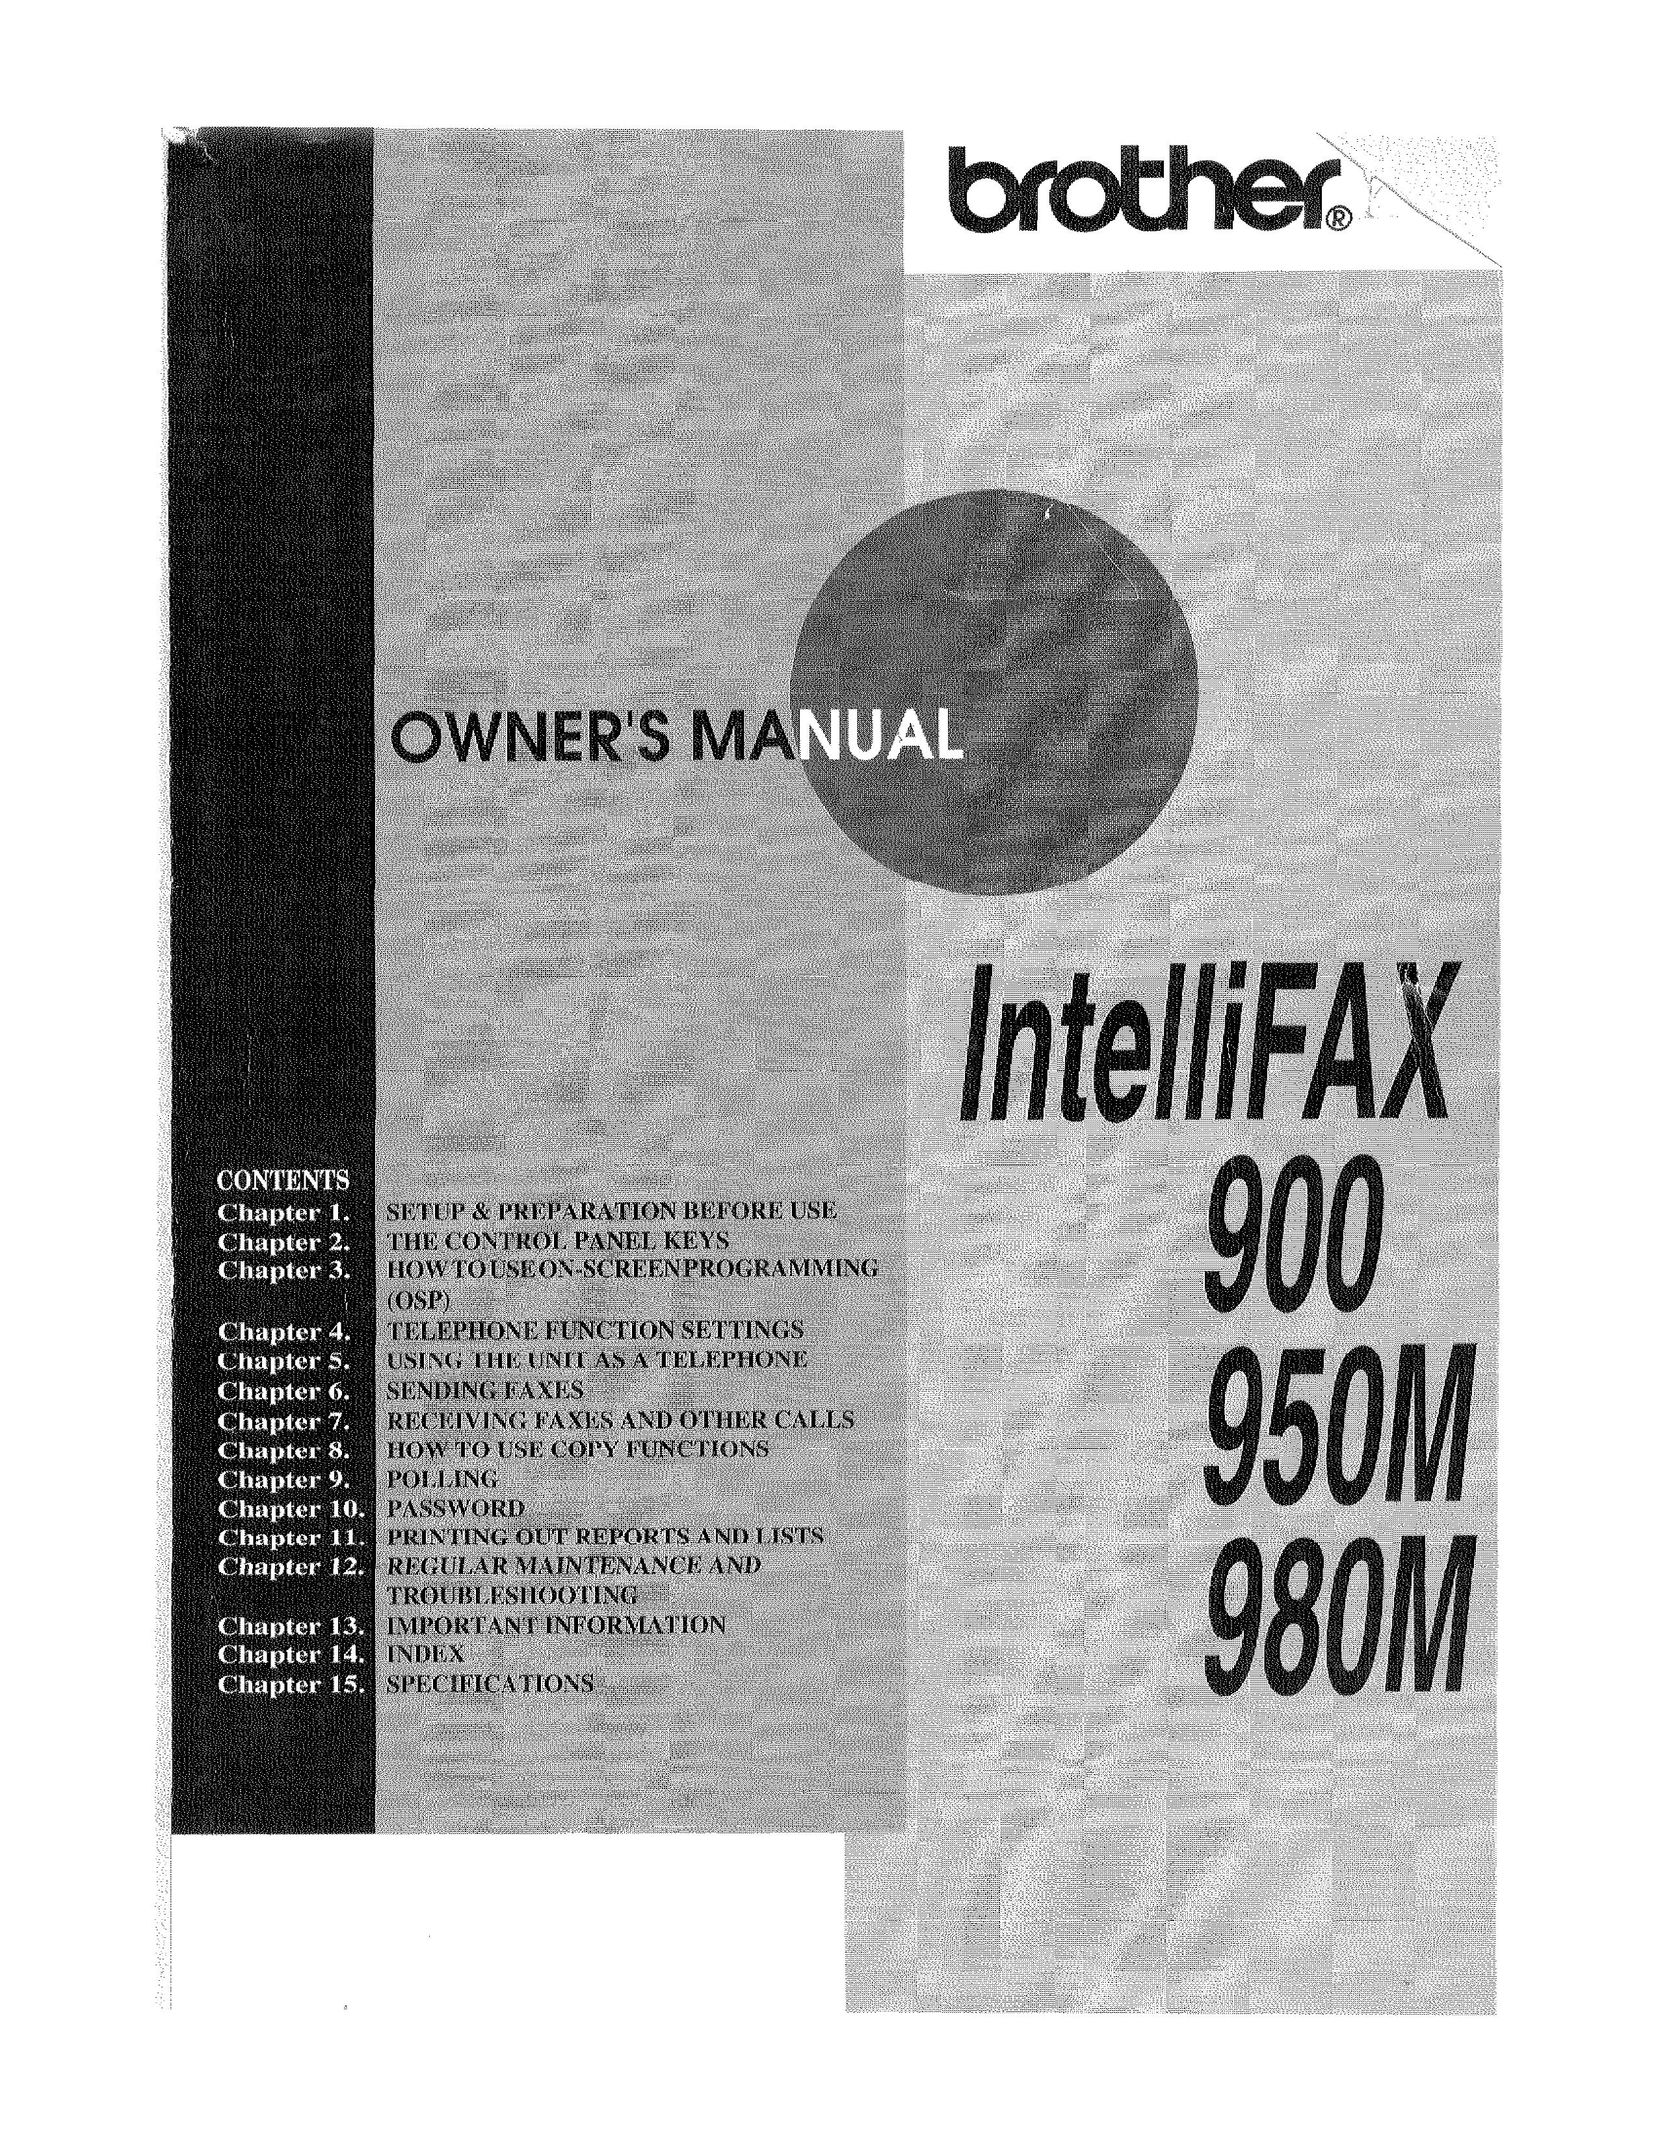 Brother 900 Fax Machine User Manual